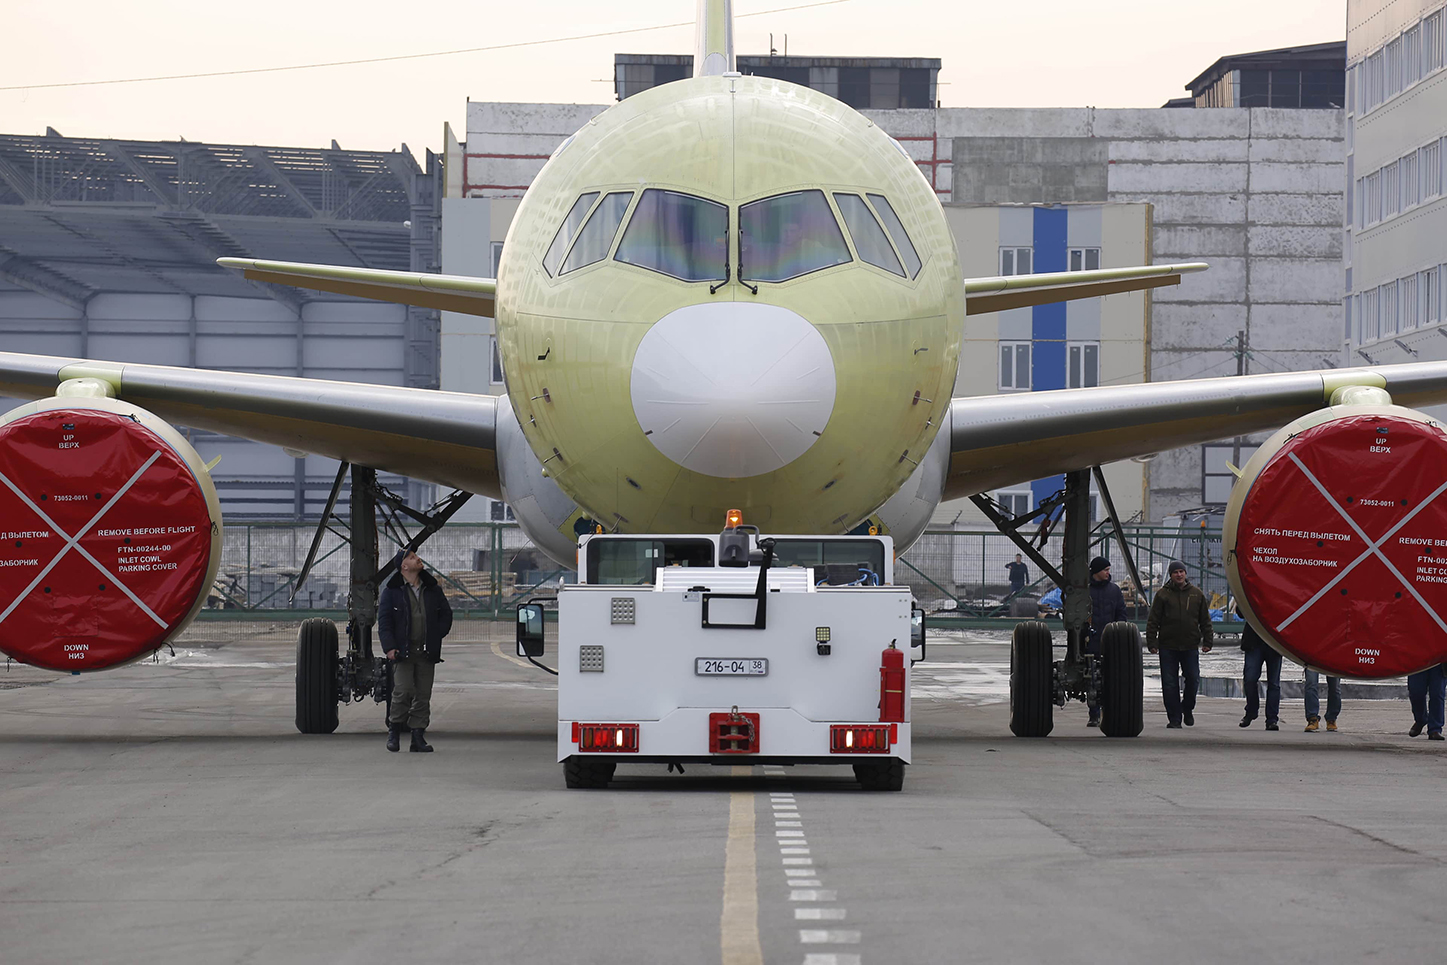 Irkut Corporation completed the construction of the second MC-21-300 aircraft